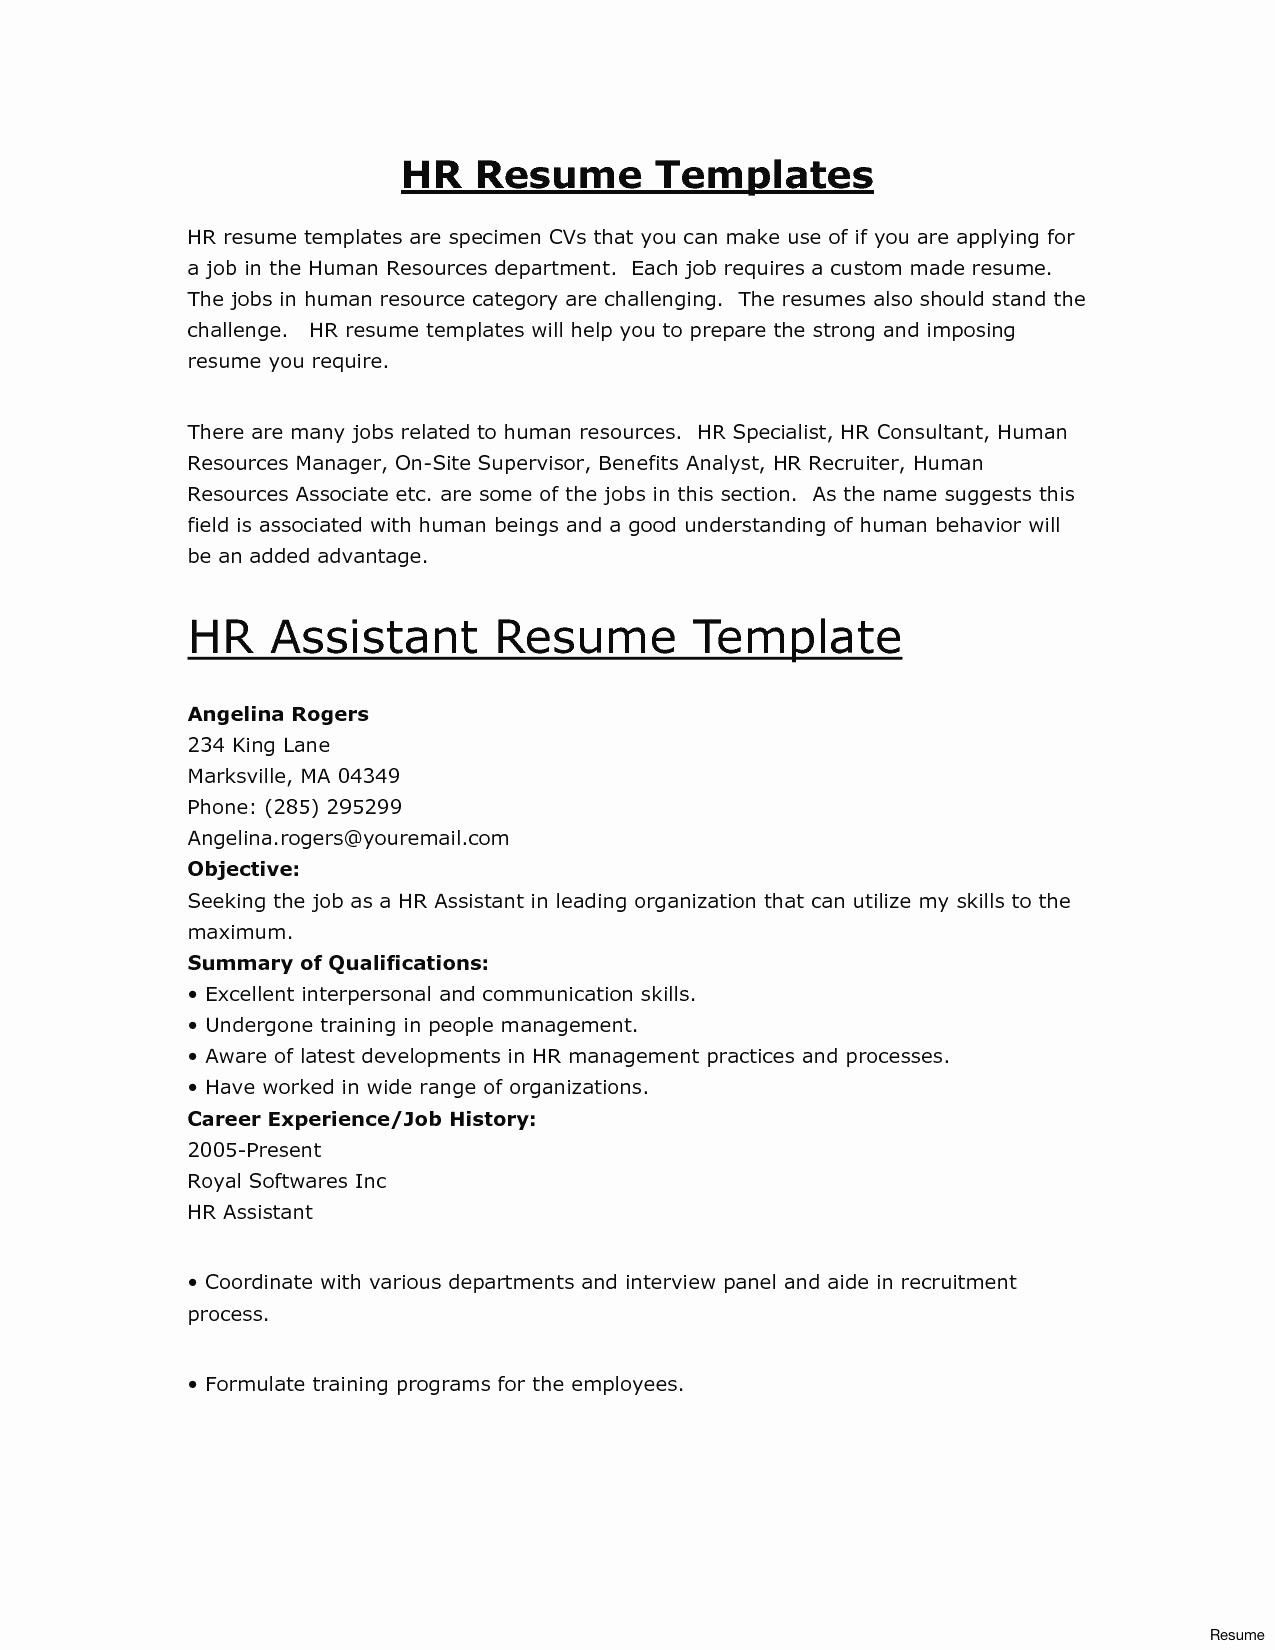 Employment Verification Letter Sample and Template - Inspirational Employment Verification Letter Template